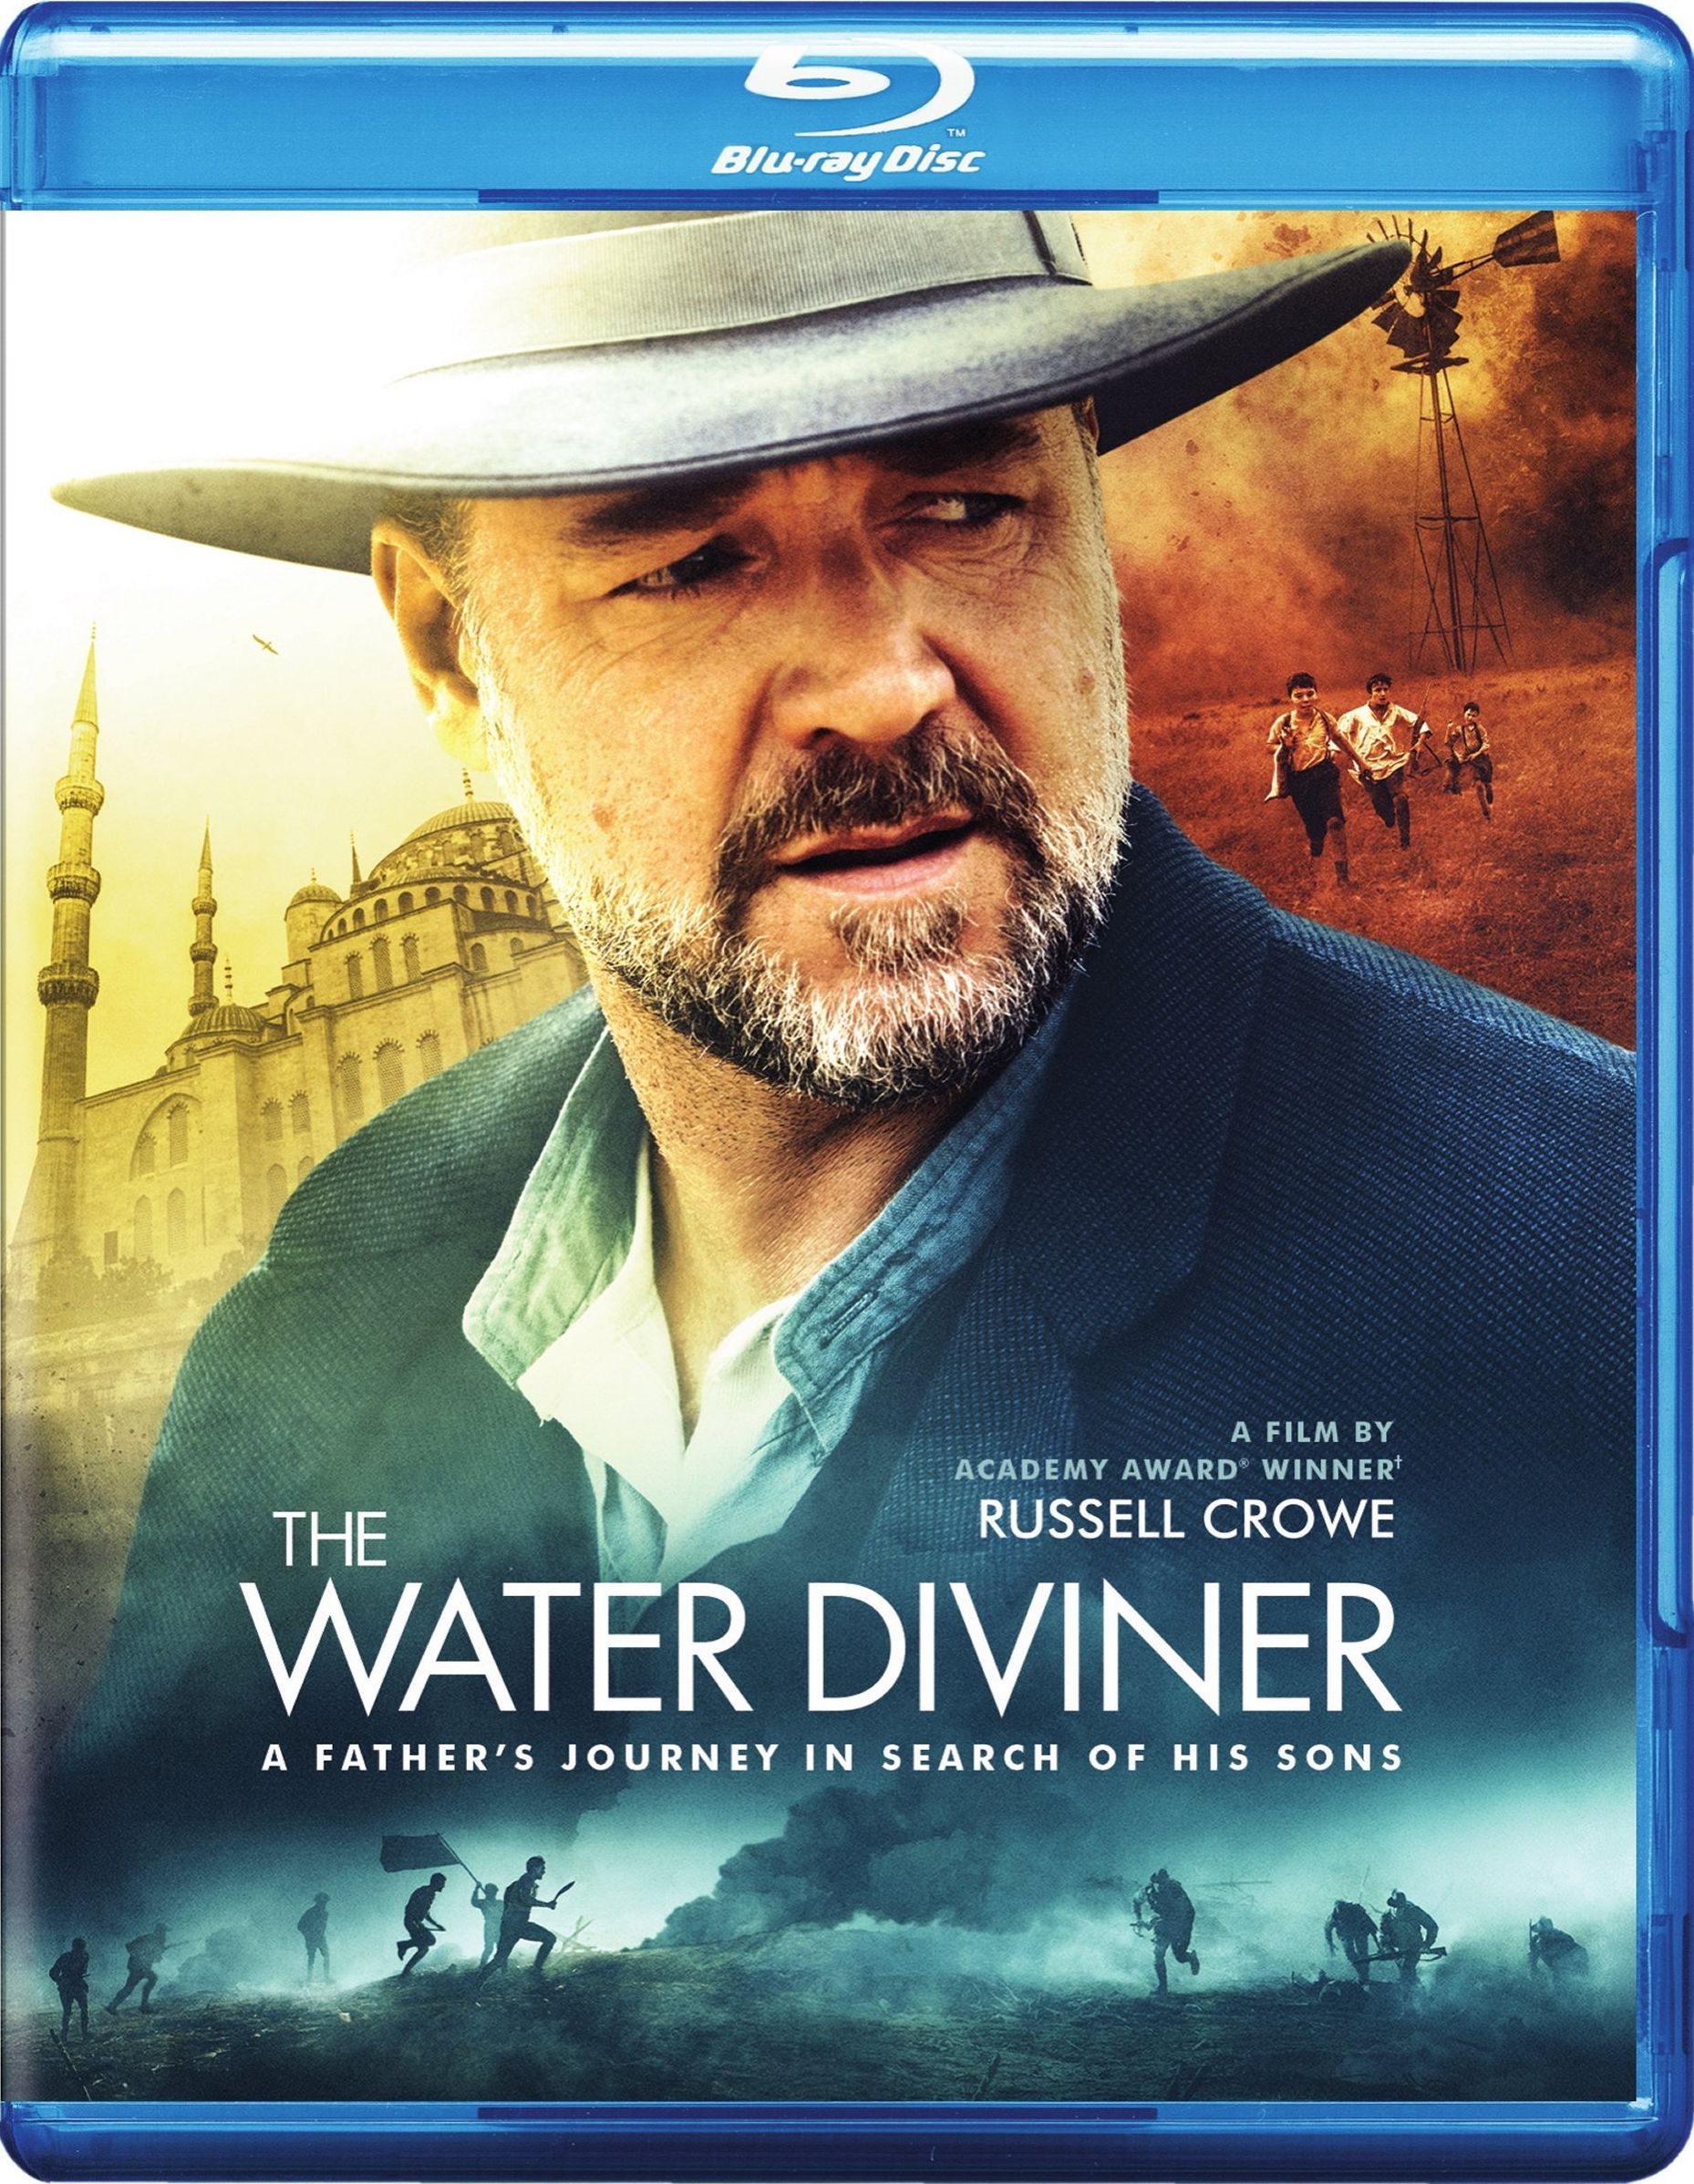 The Water Divinert Blu-ray Review